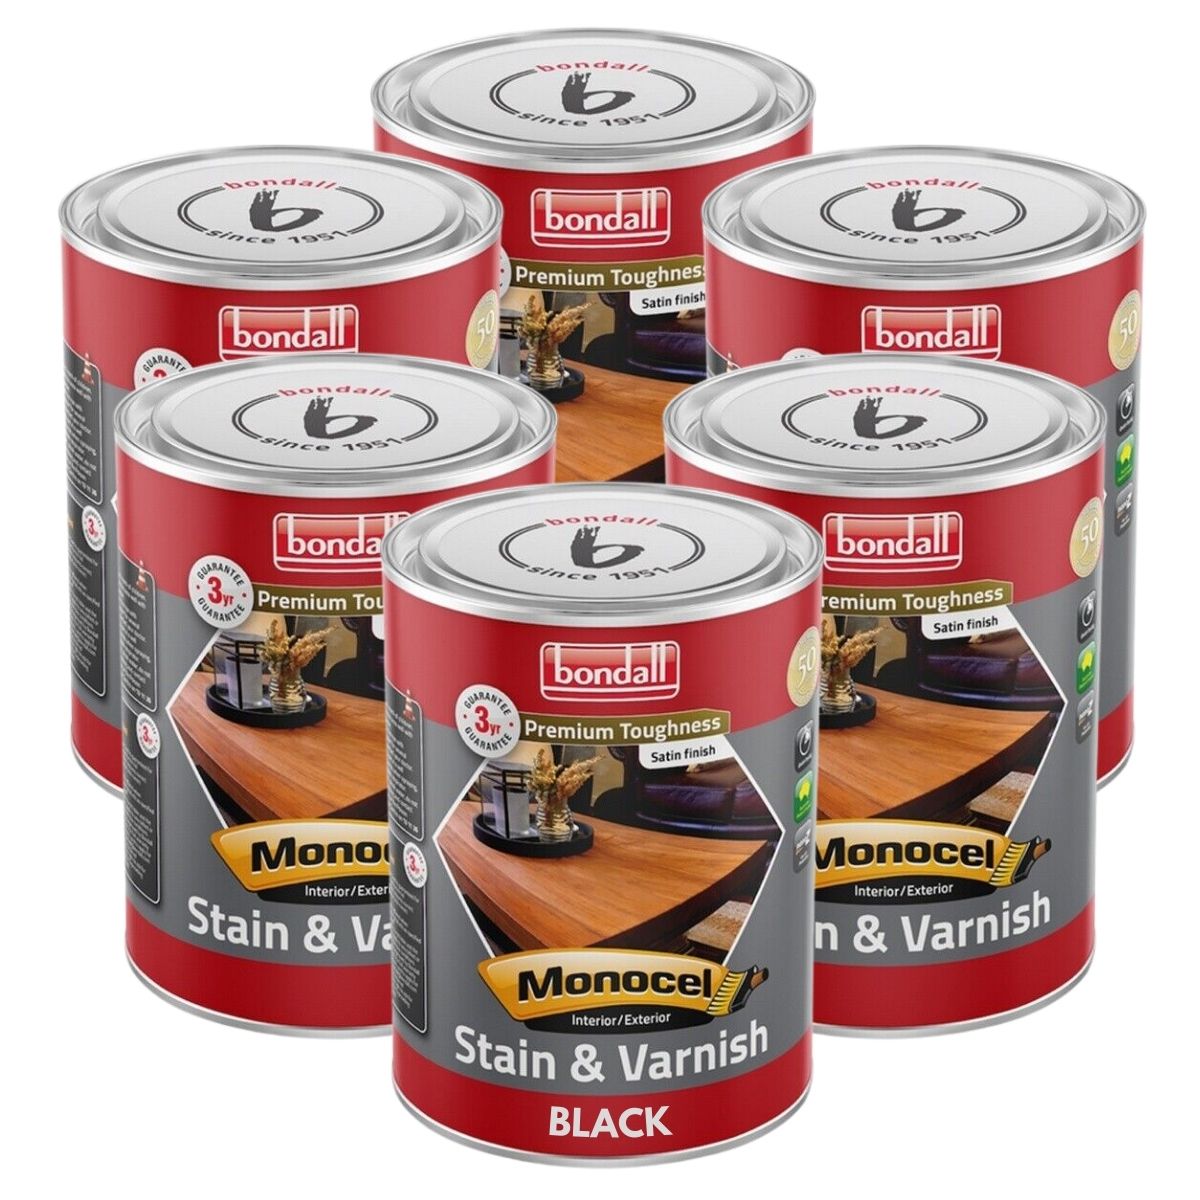 Bondall Monocel Interior & Exterior Stain And Varnish | Black 500ml | 6 Tins - South East Clearance Centre